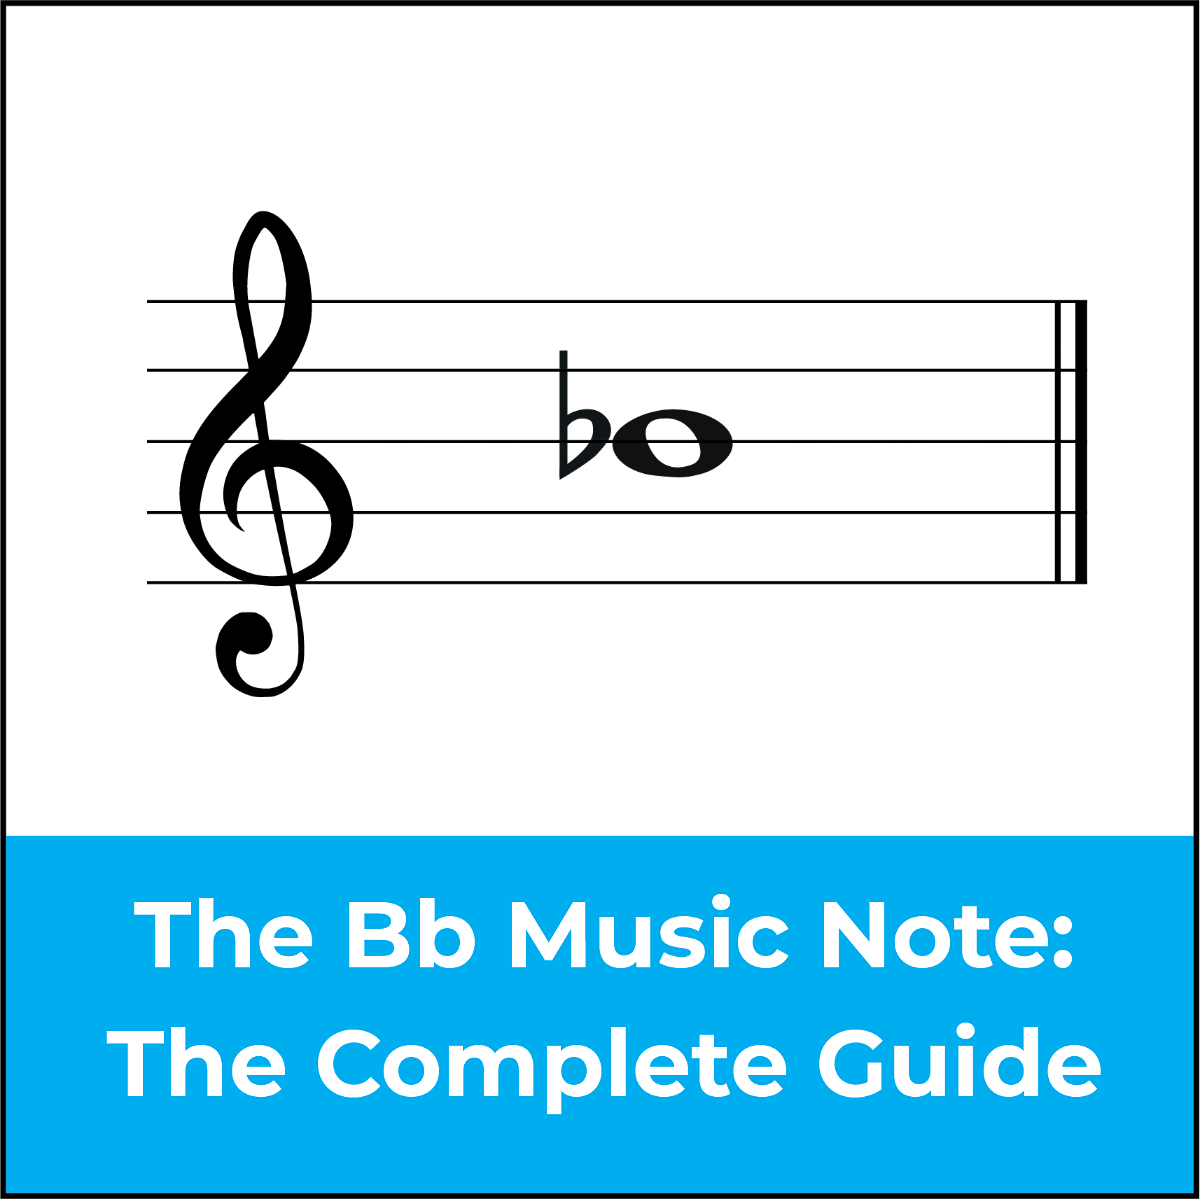 B Flat Music Note: The Complete Guide to the Note and Key